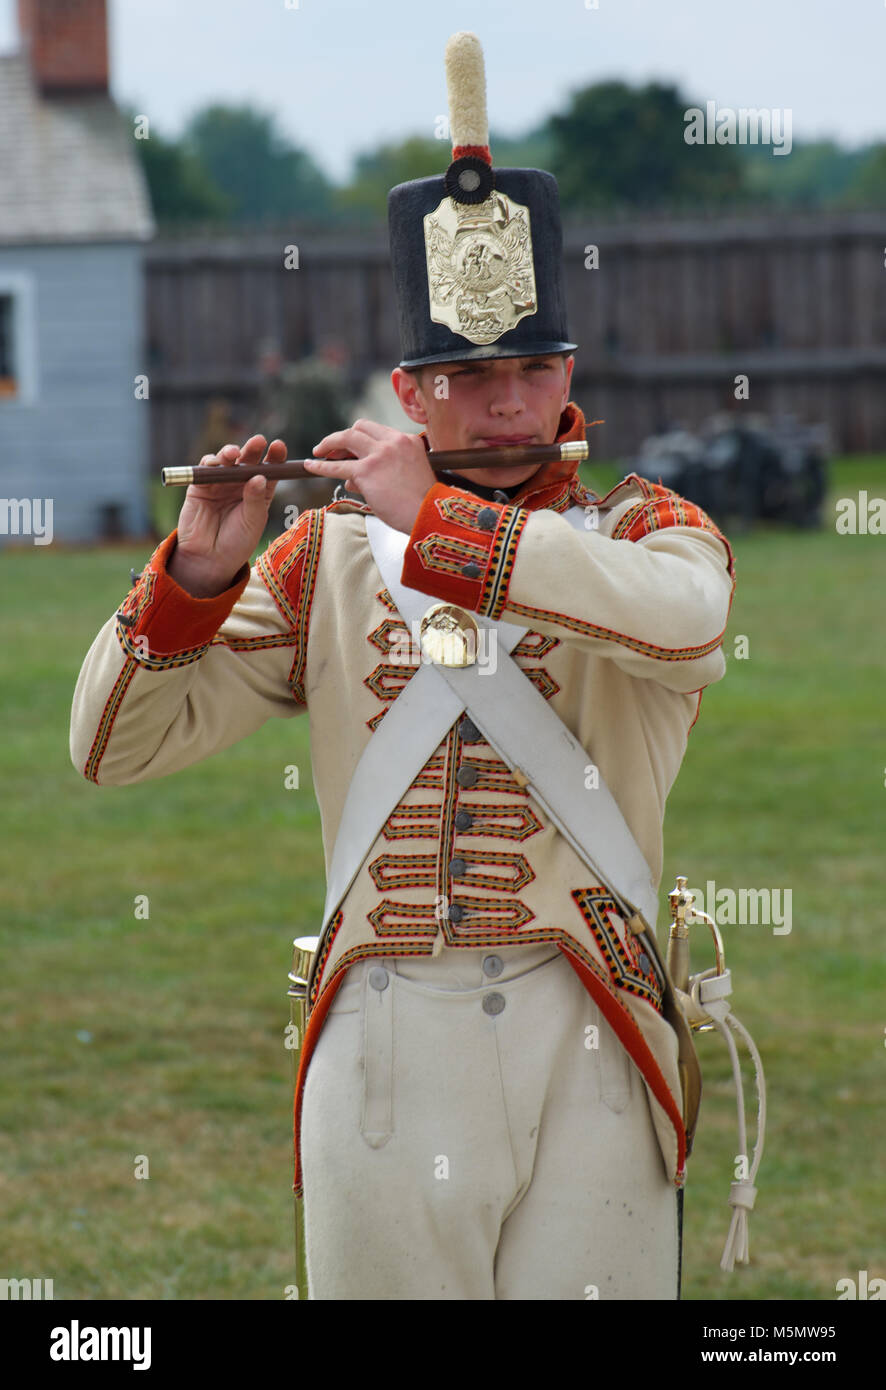 A member of the Fife and Drum band performing at Fort George National Historic Site, Niagara-on-the-Lake, Ontario, Canada Stock Photo